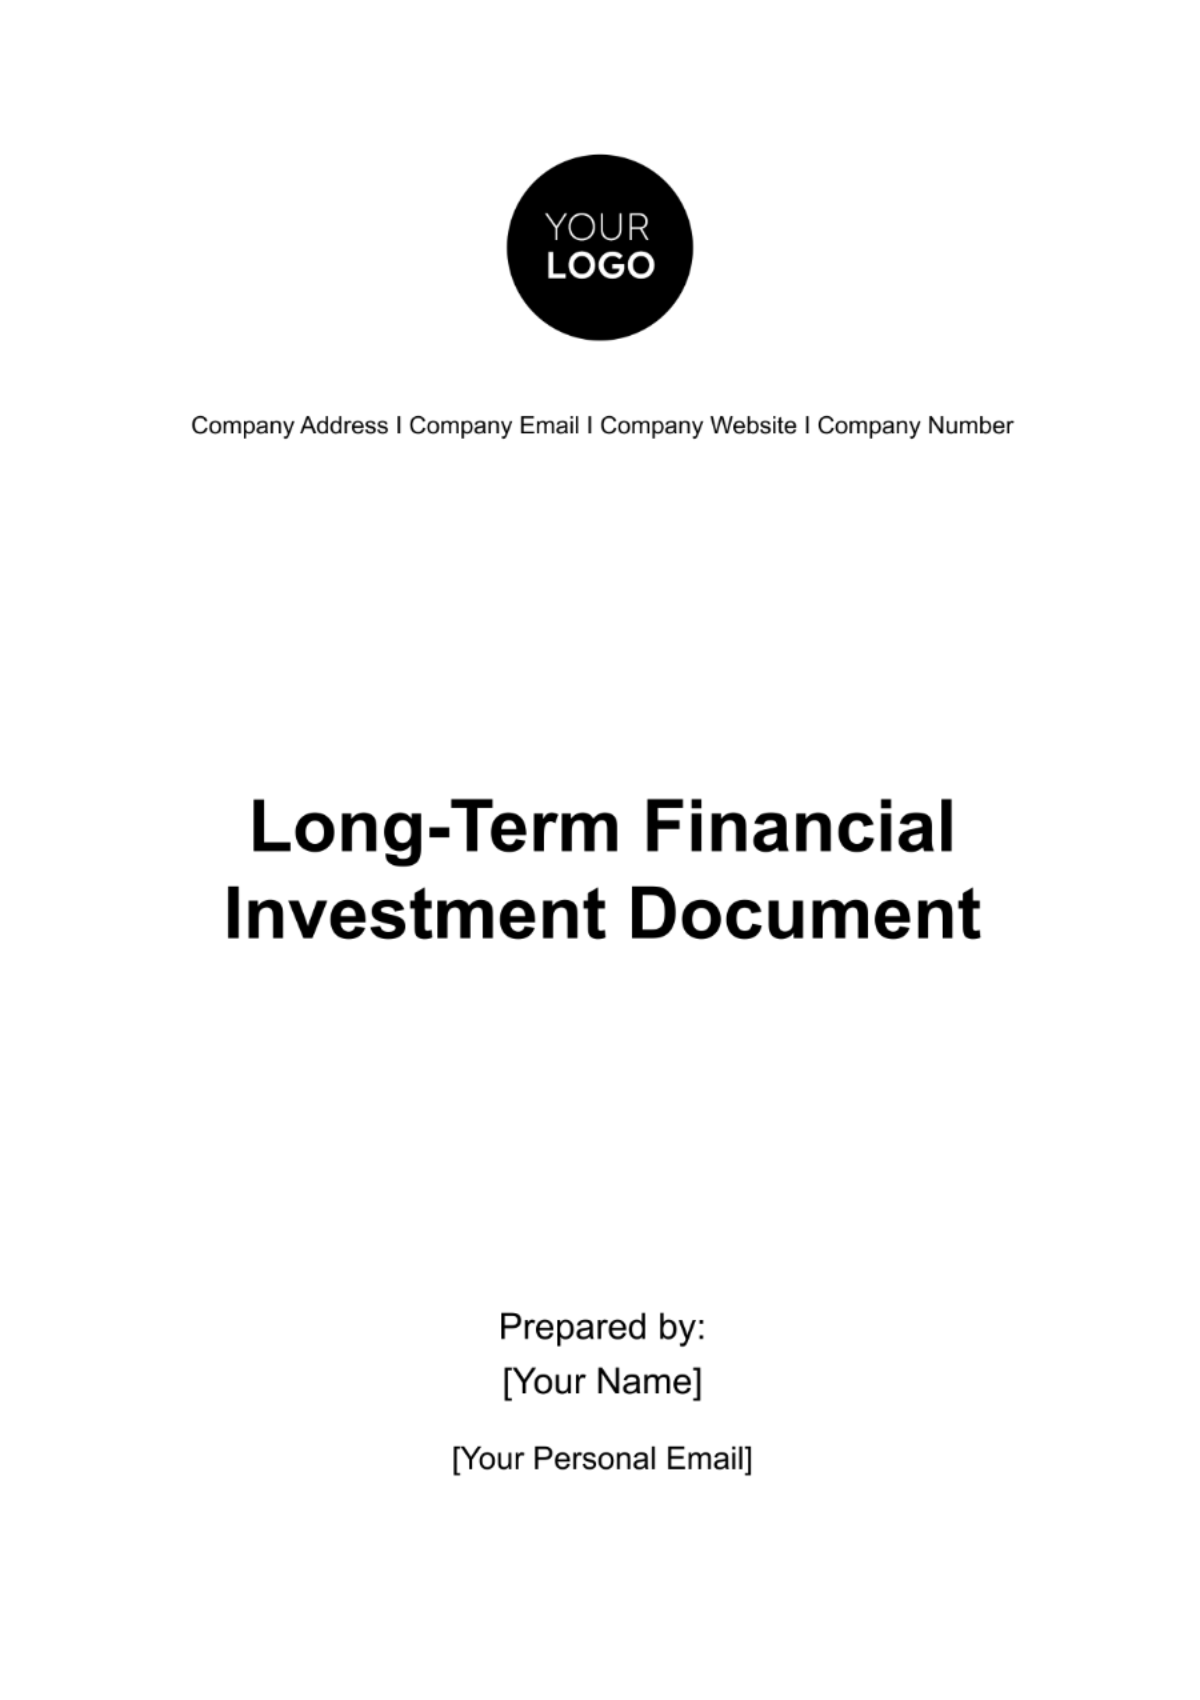 Long-Term Financial Investment Document Template